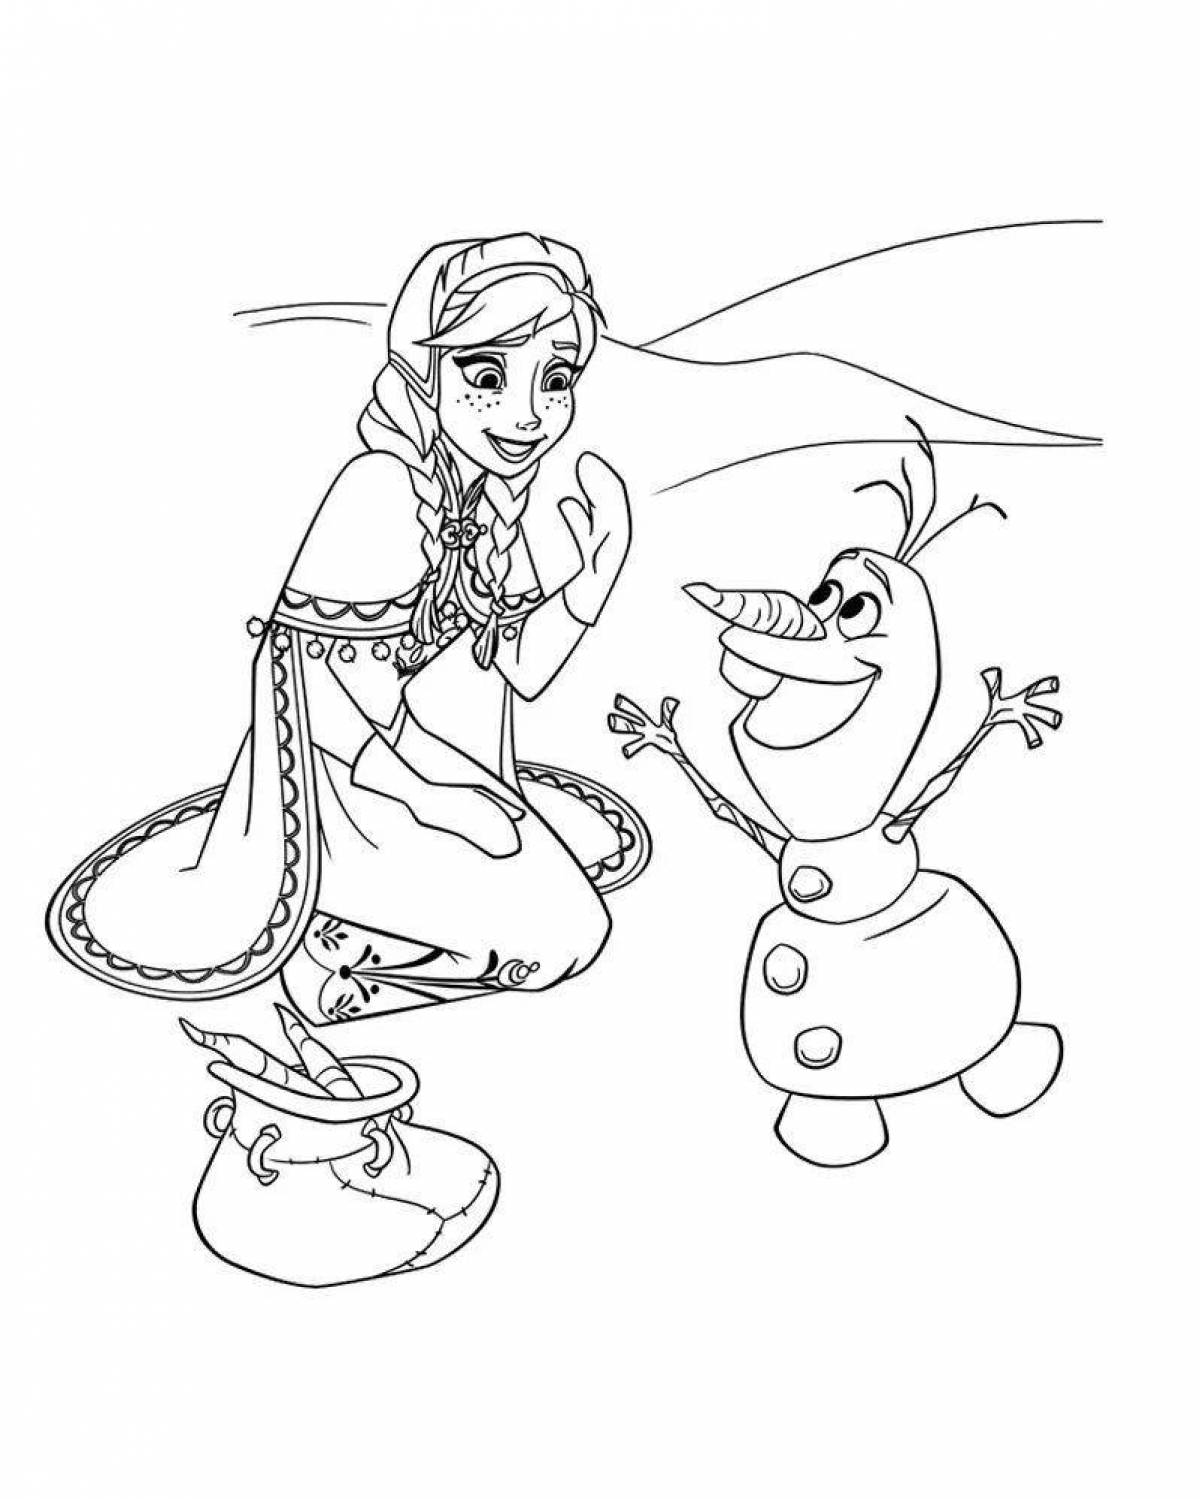 Anna and Olaf jubilant coloring page